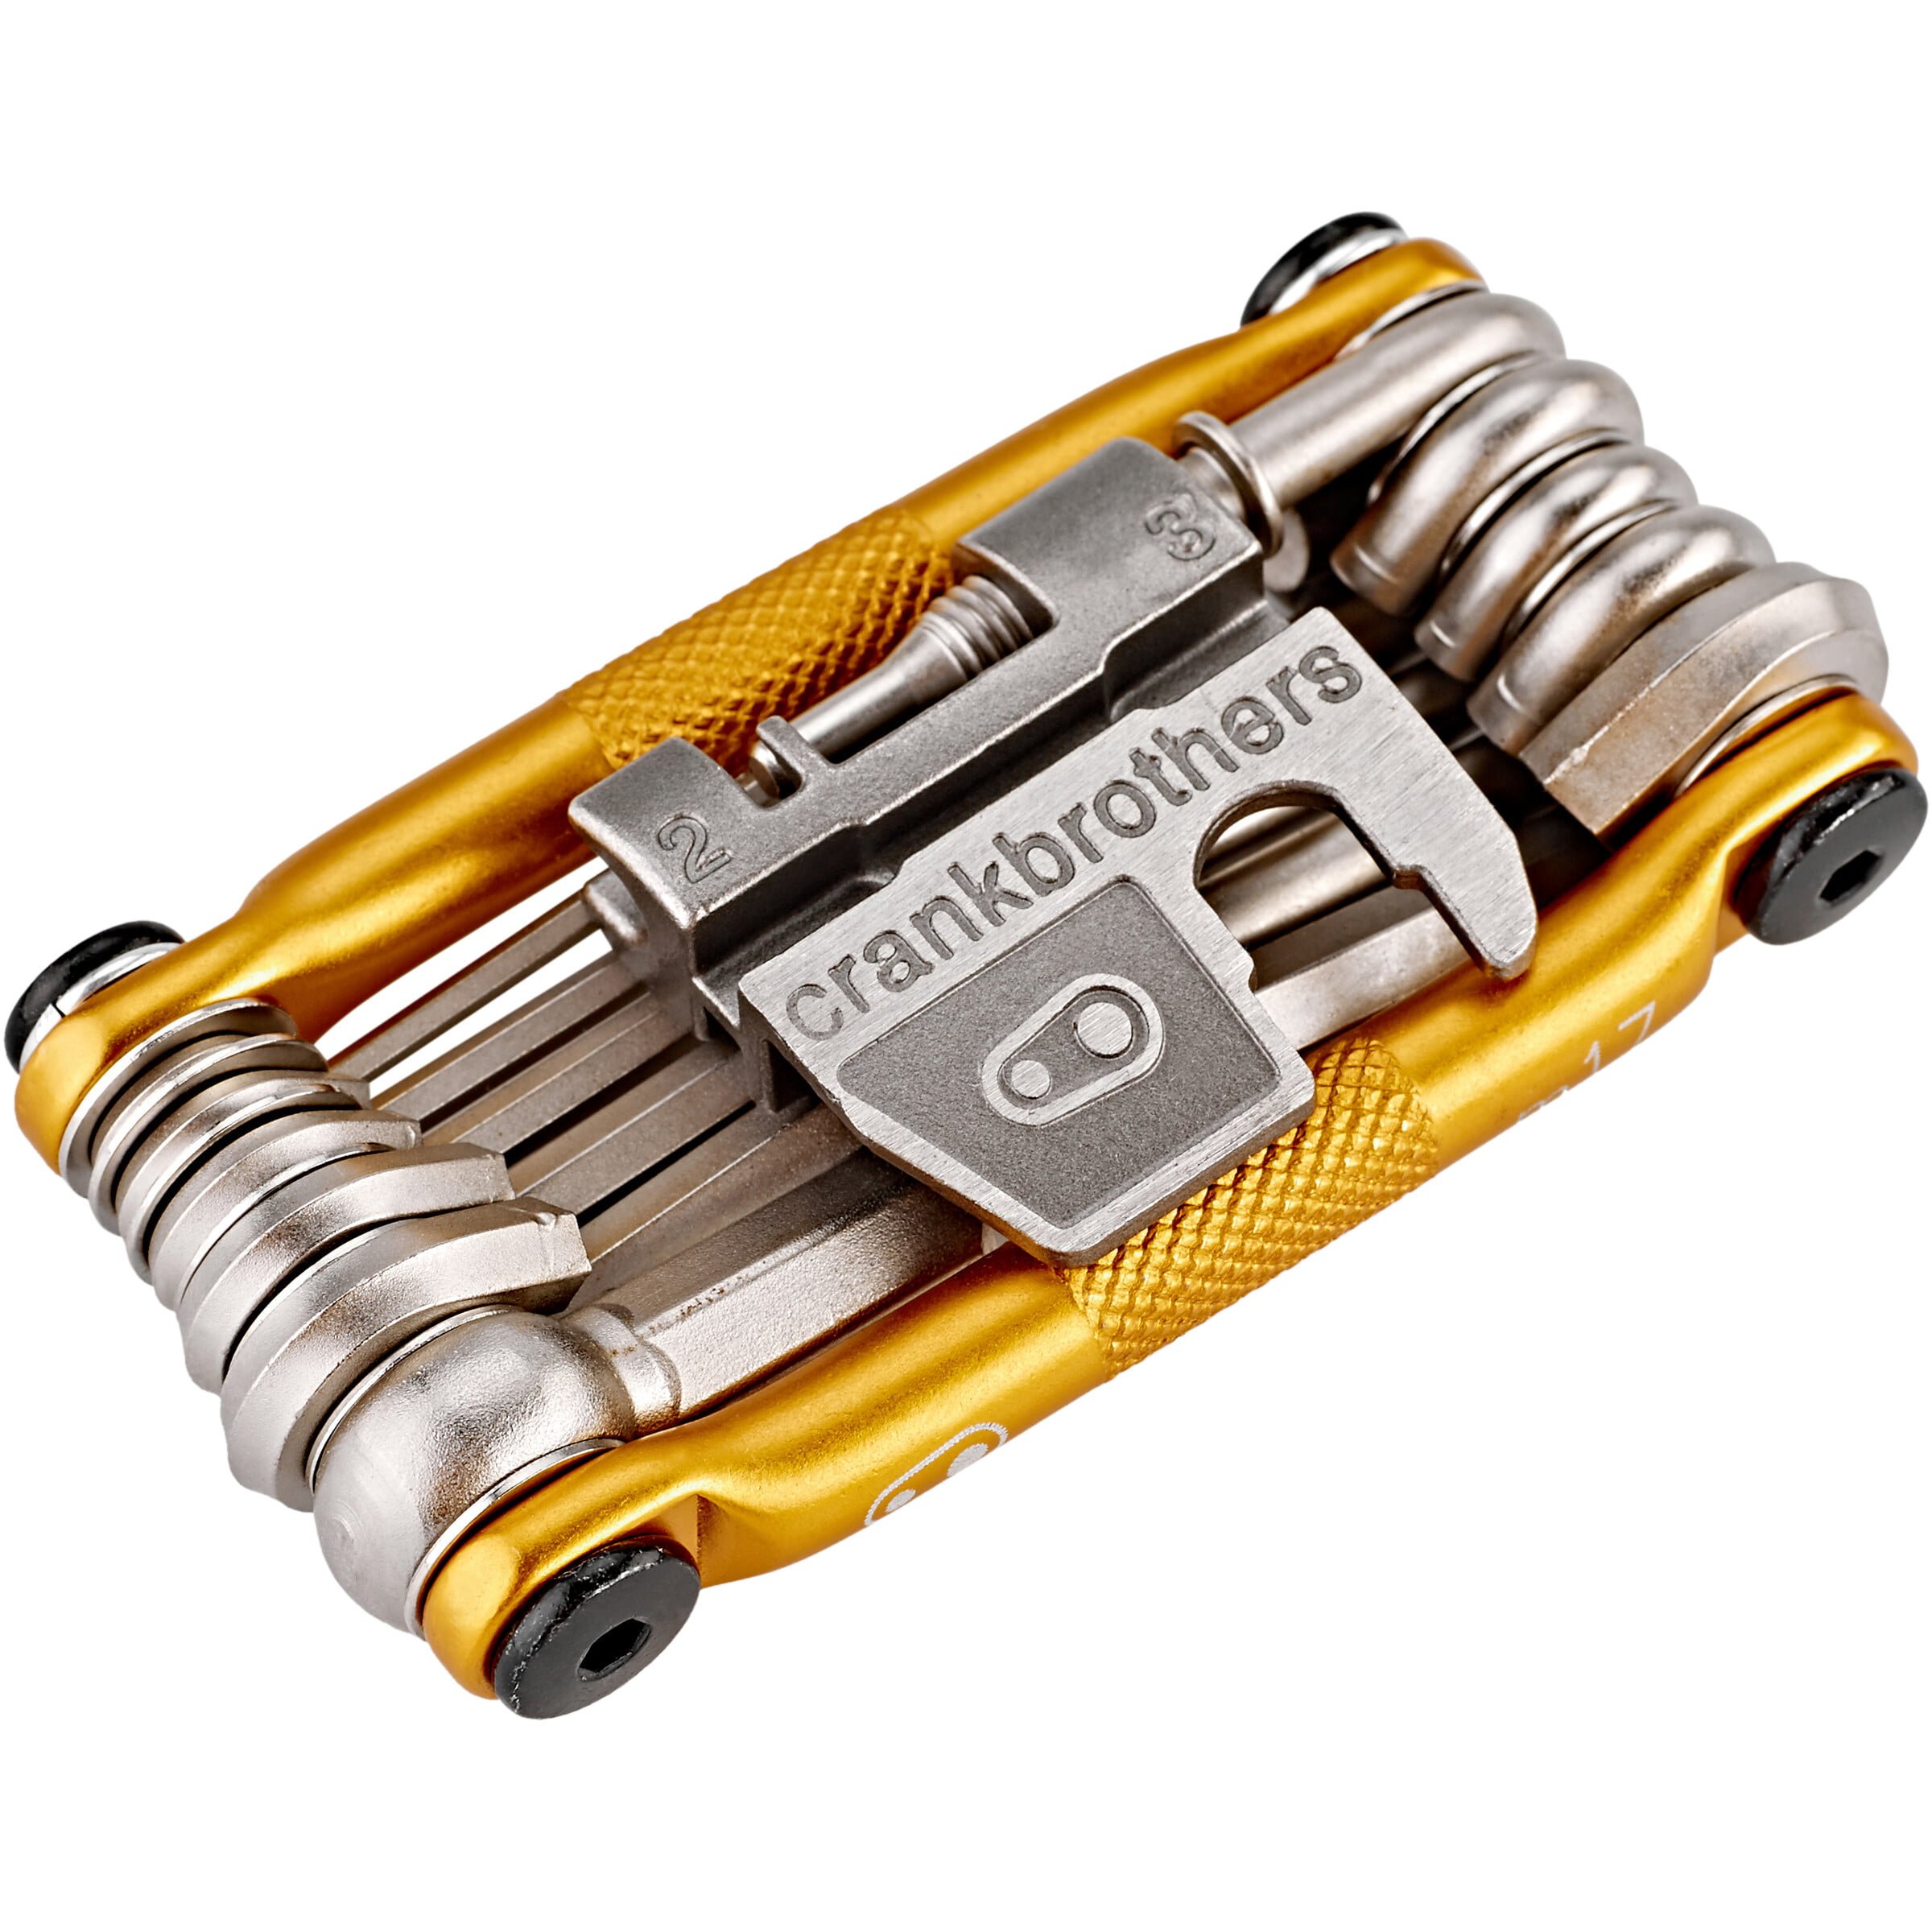 CRANKBROTHERS Multi-tool M17 featured imge